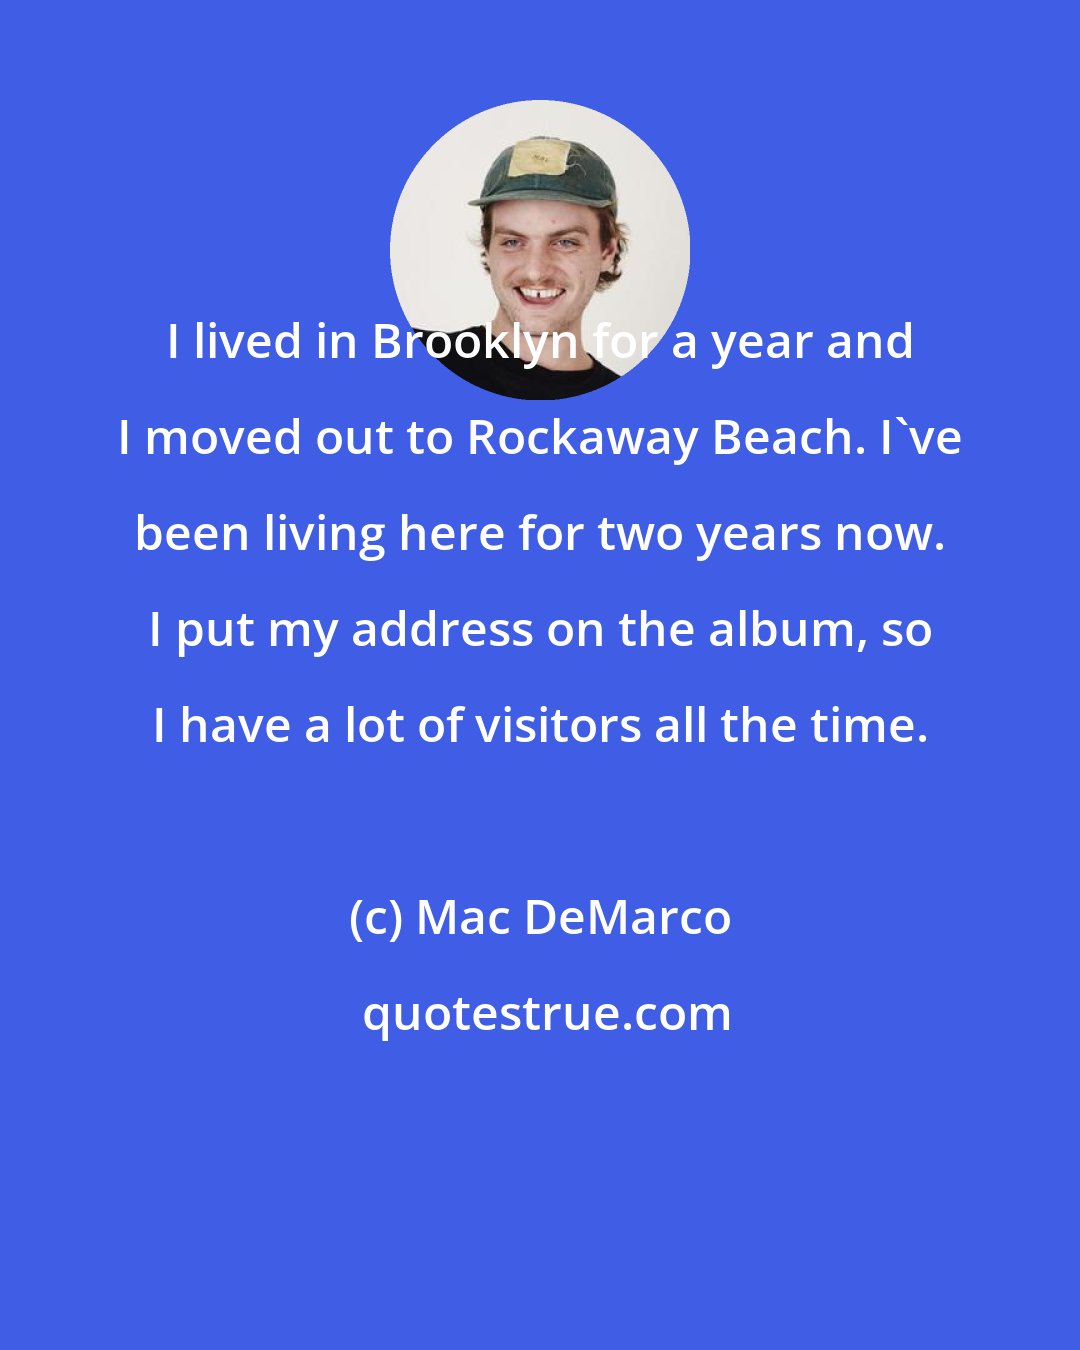 Mac DeMarco: I lived in Brooklyn for a year and I moved out to Rockaway Beach. I've been living here for two years now. I put my address on the album, so I have a lot of visitors all the time.